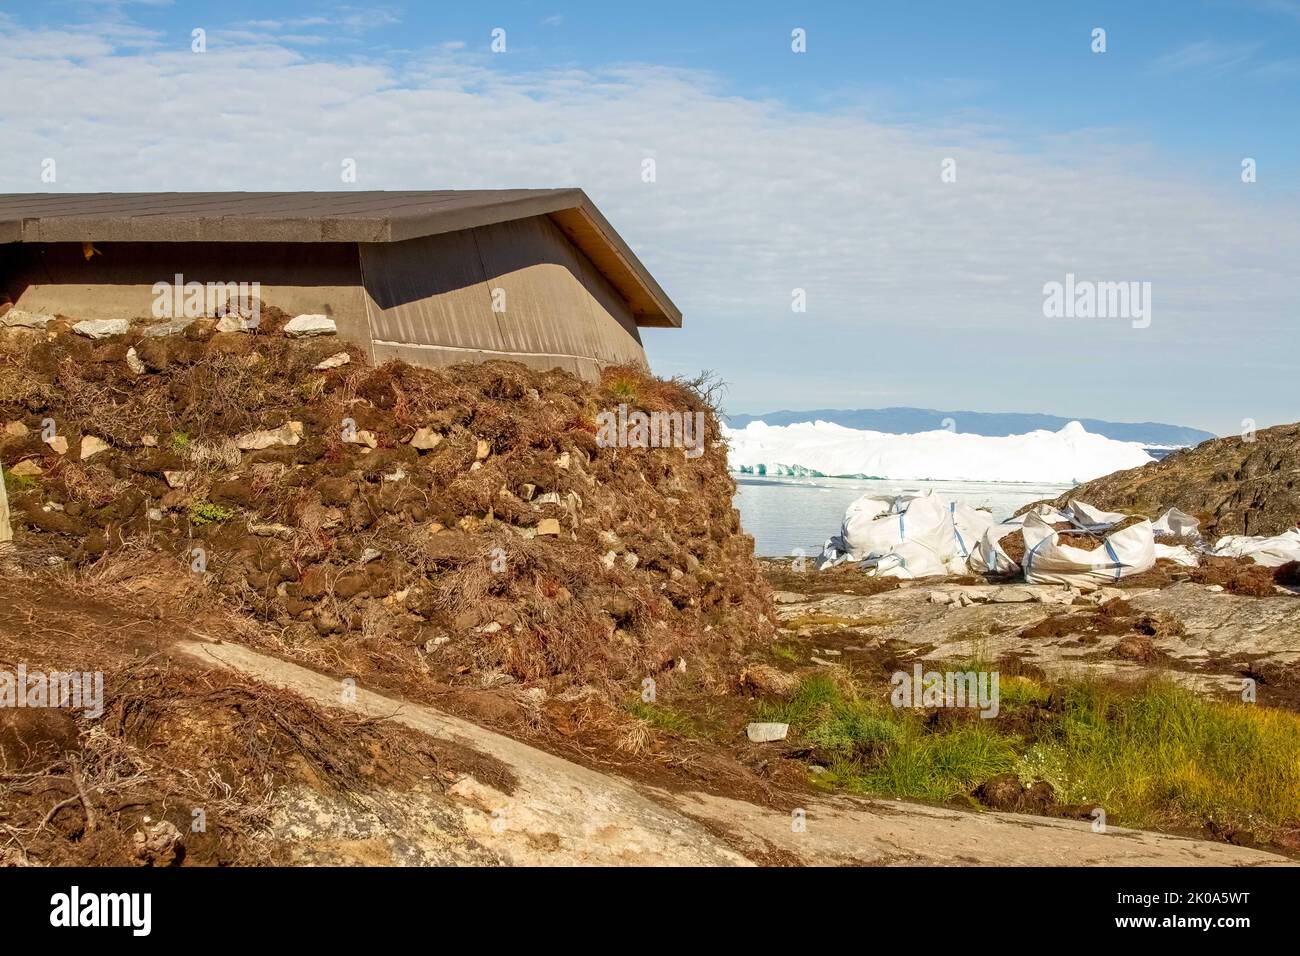 Constrtuction of traditional sod house at Ilulissat Icefiord, Greenland. , a Unesco World Heritage Site. Stock Photo